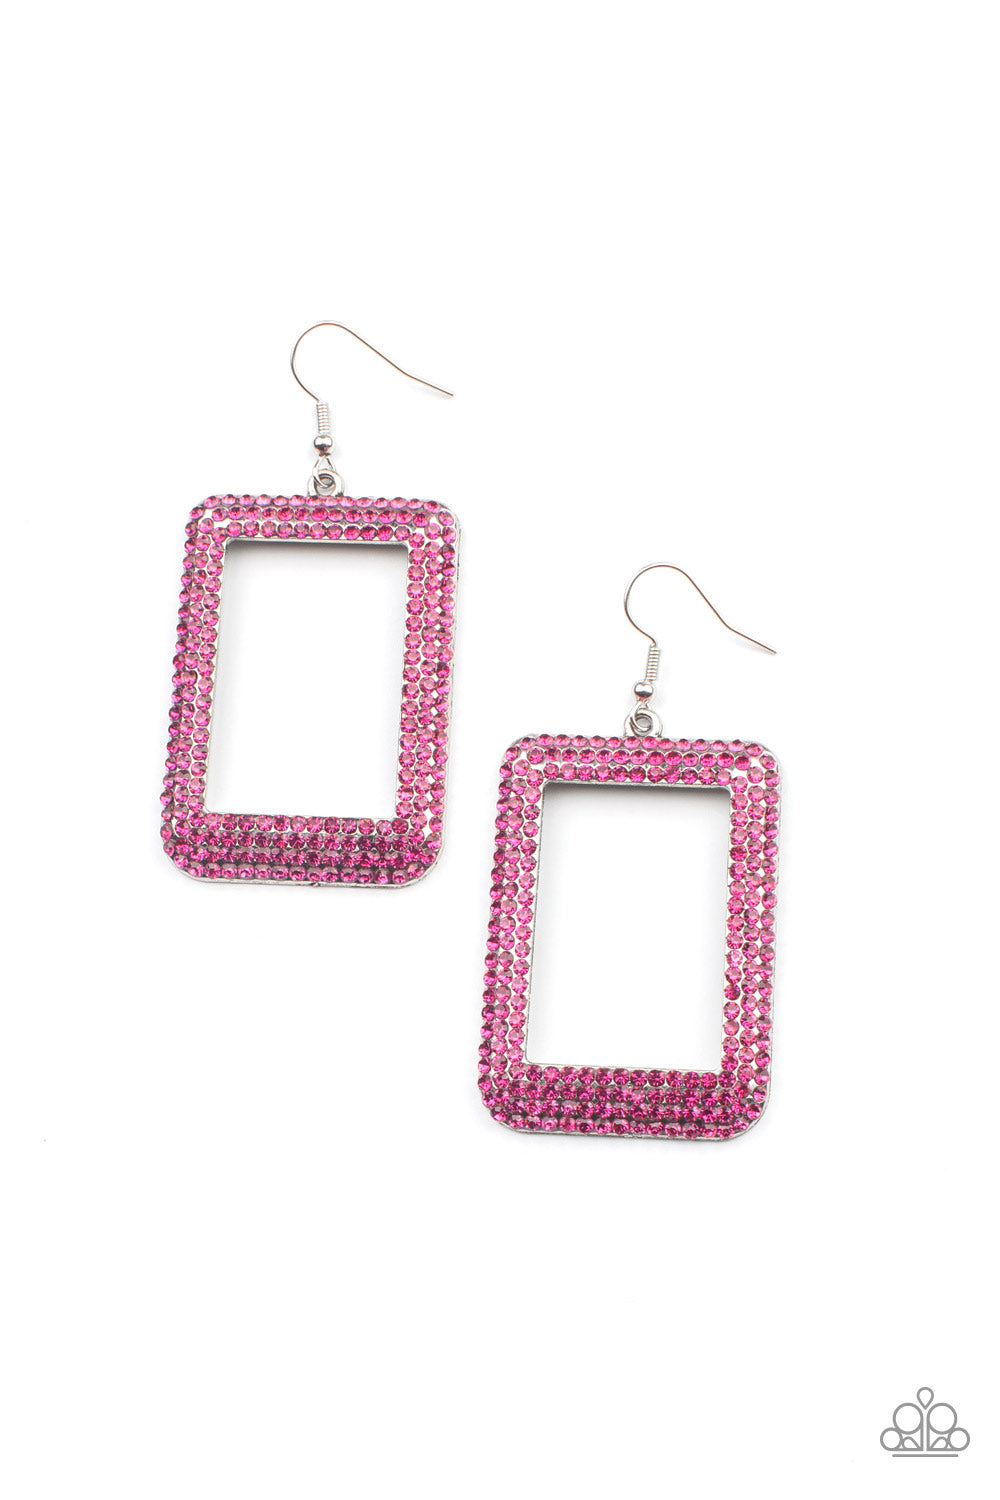 World FRAME-ous - pink - Paparazzi earrings